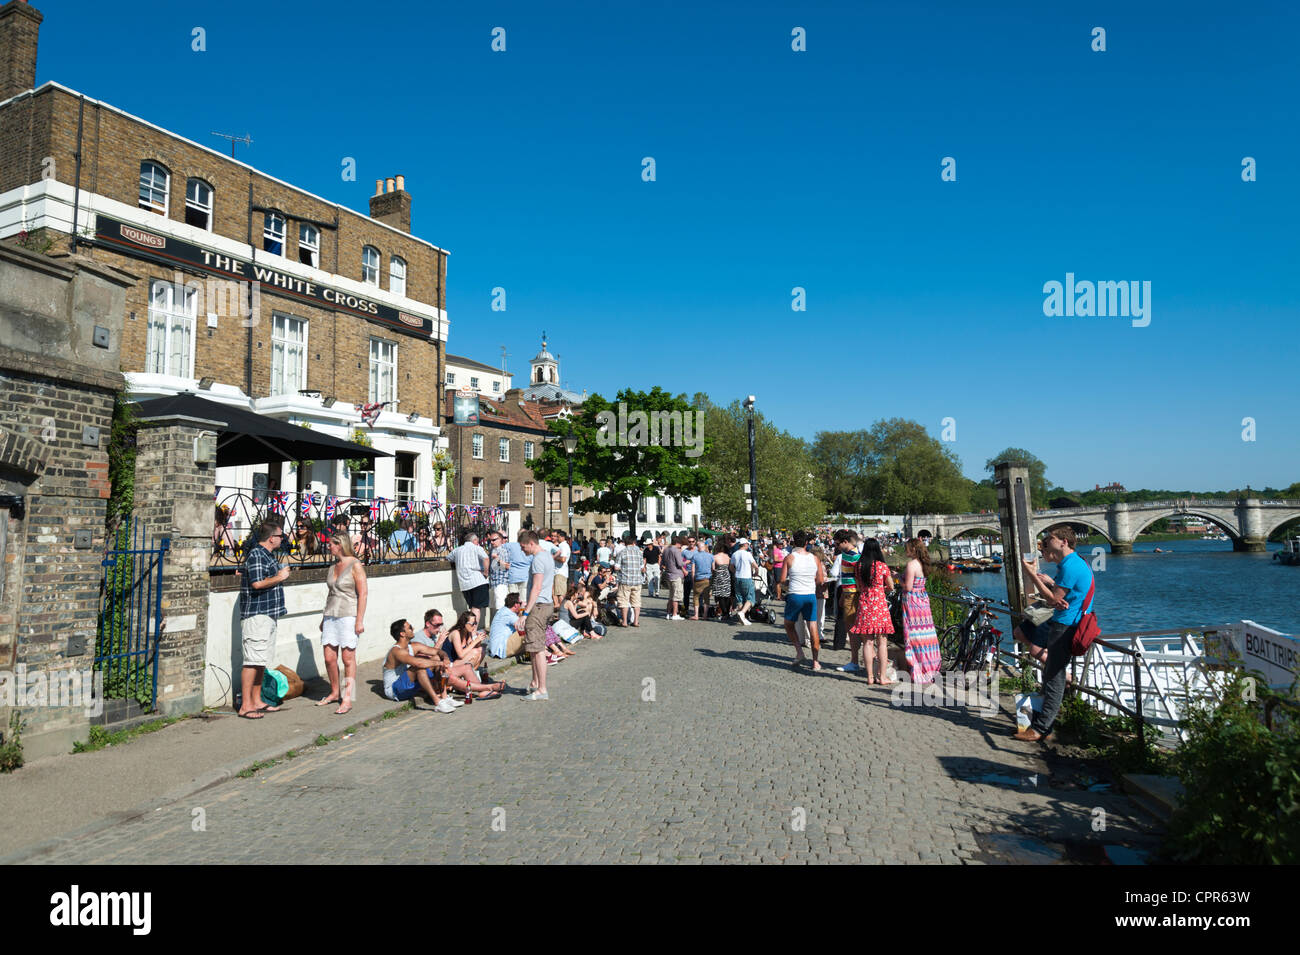 The White Cross pub Richmond on Thames London UK on a summer day with people relaxing outside in the sunshine Stock Photo